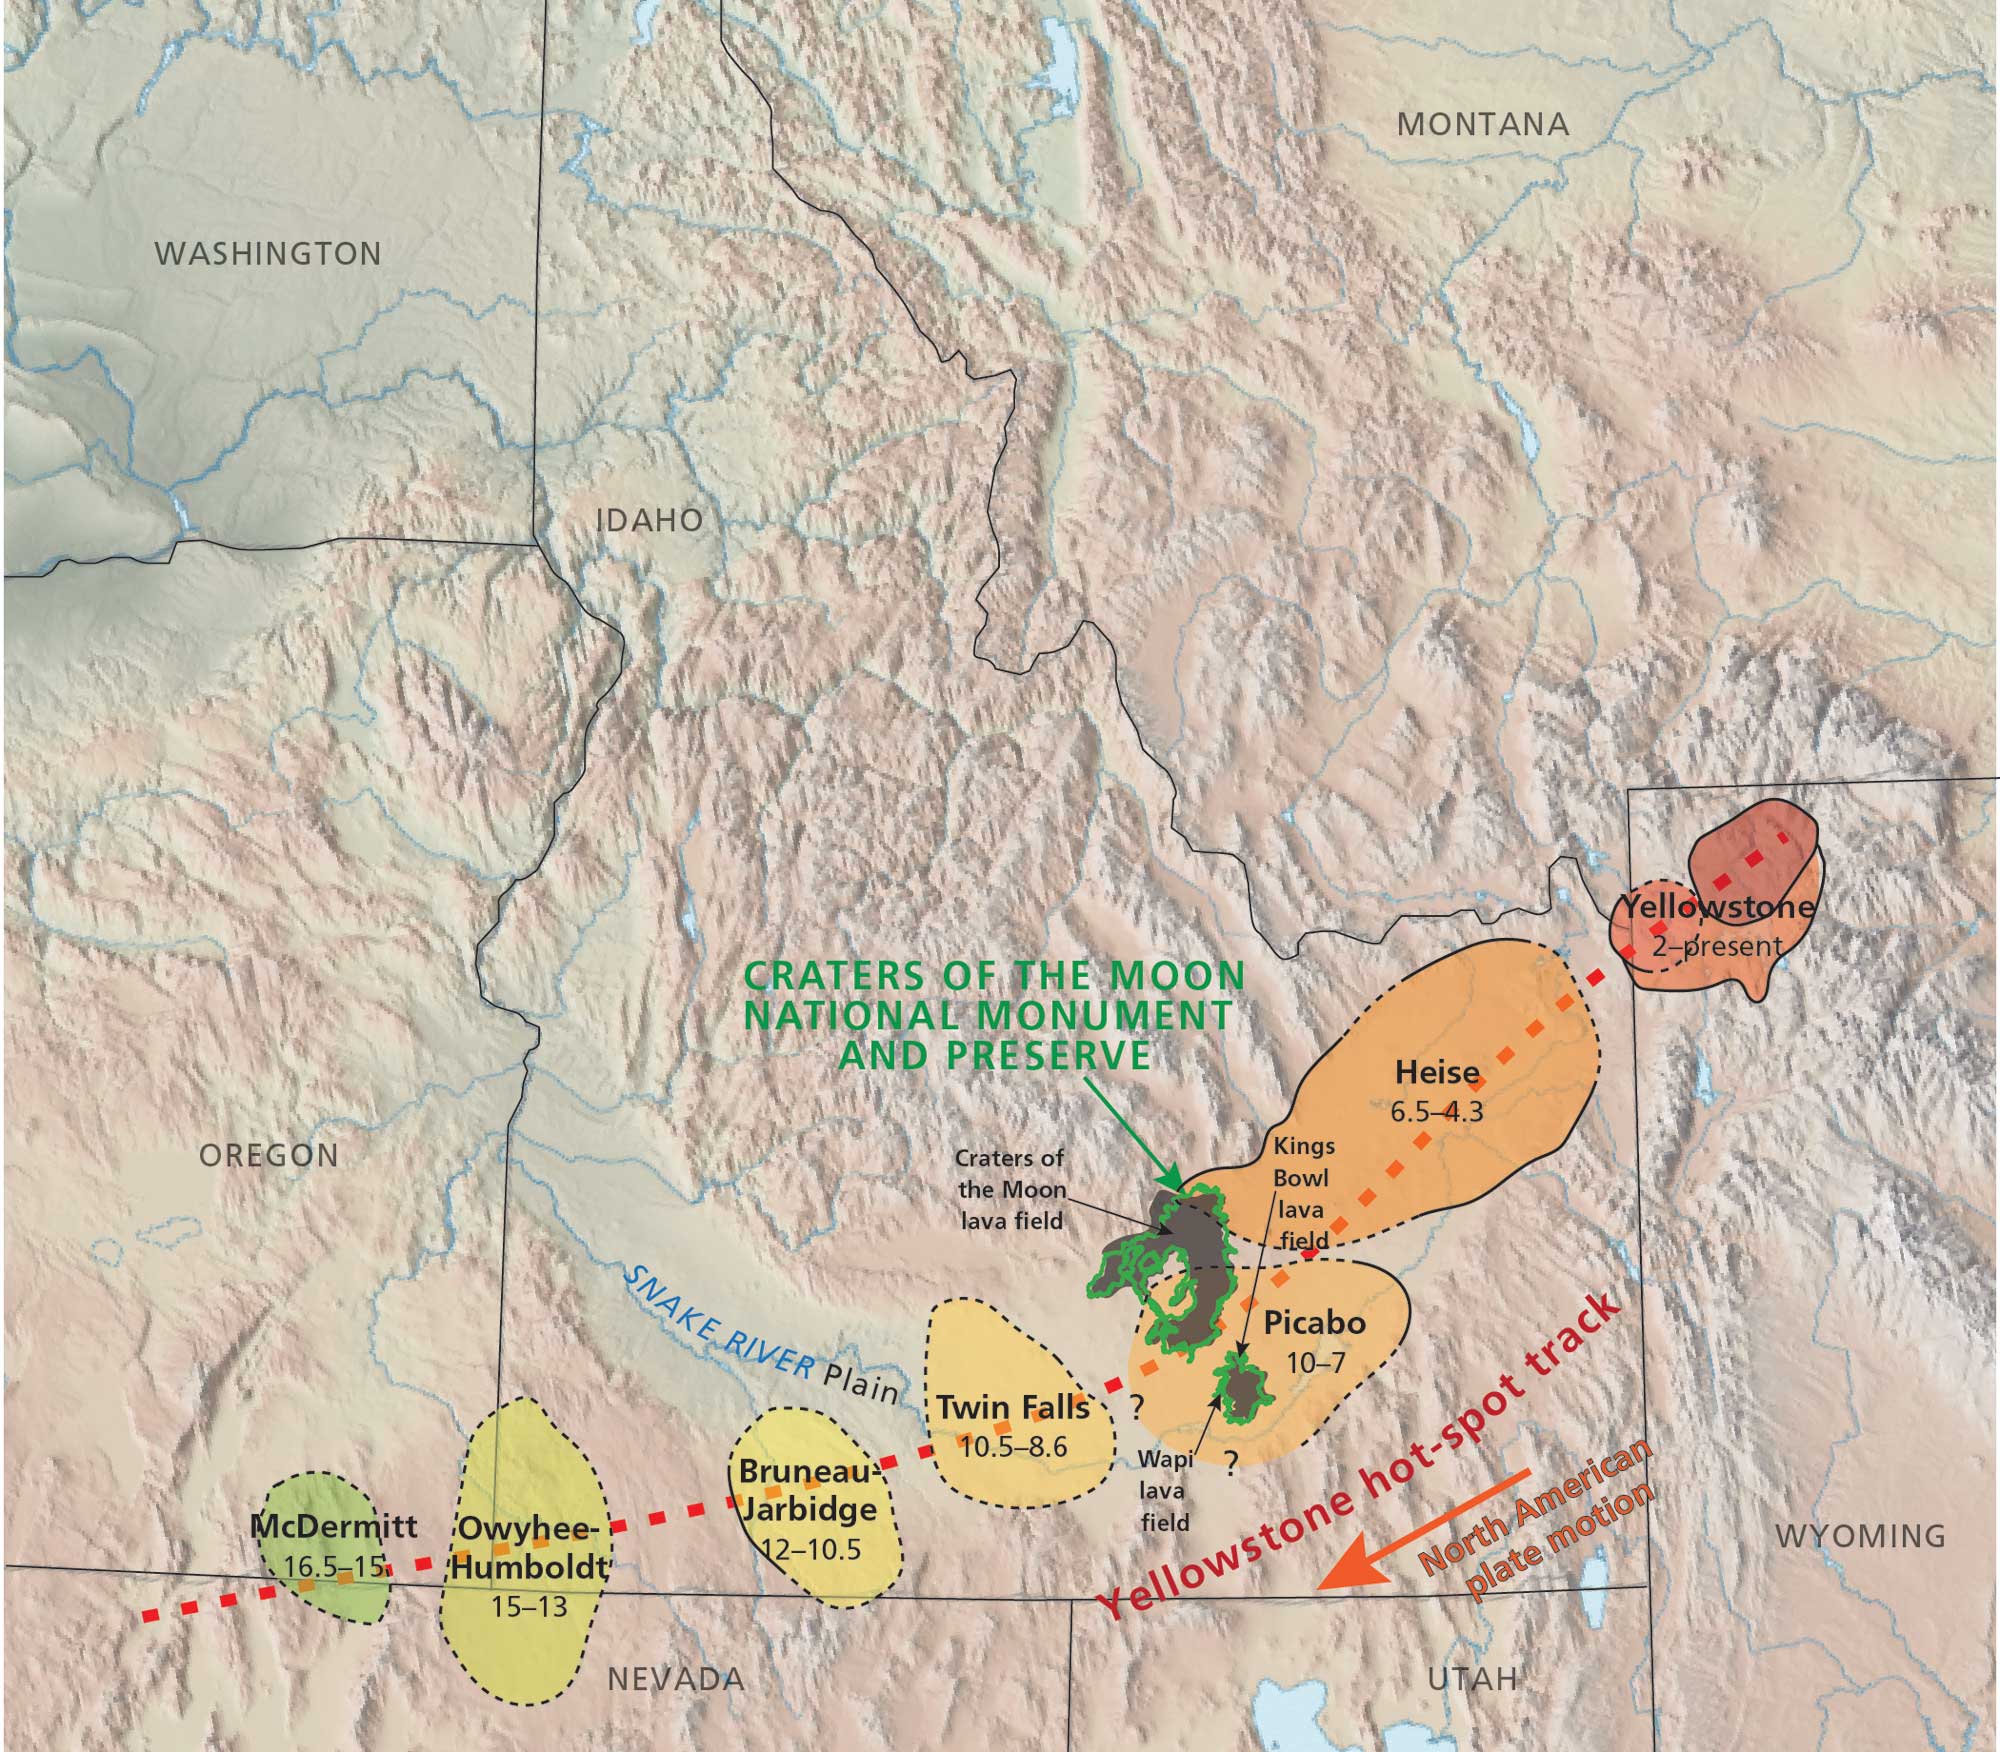 Relief map of Idaho and surrounding region shaded to show the track fo the Yellowstone Hot Spot from 16.5 million years to the present. At about 16.5 million years ago, the hotspot was on the southeastern Oregon-northern Nevada border. Over time, it has moved to the northeast because the North American continent is drifting toward the southwest. It is currently located in the northwest corner of Wyoming.